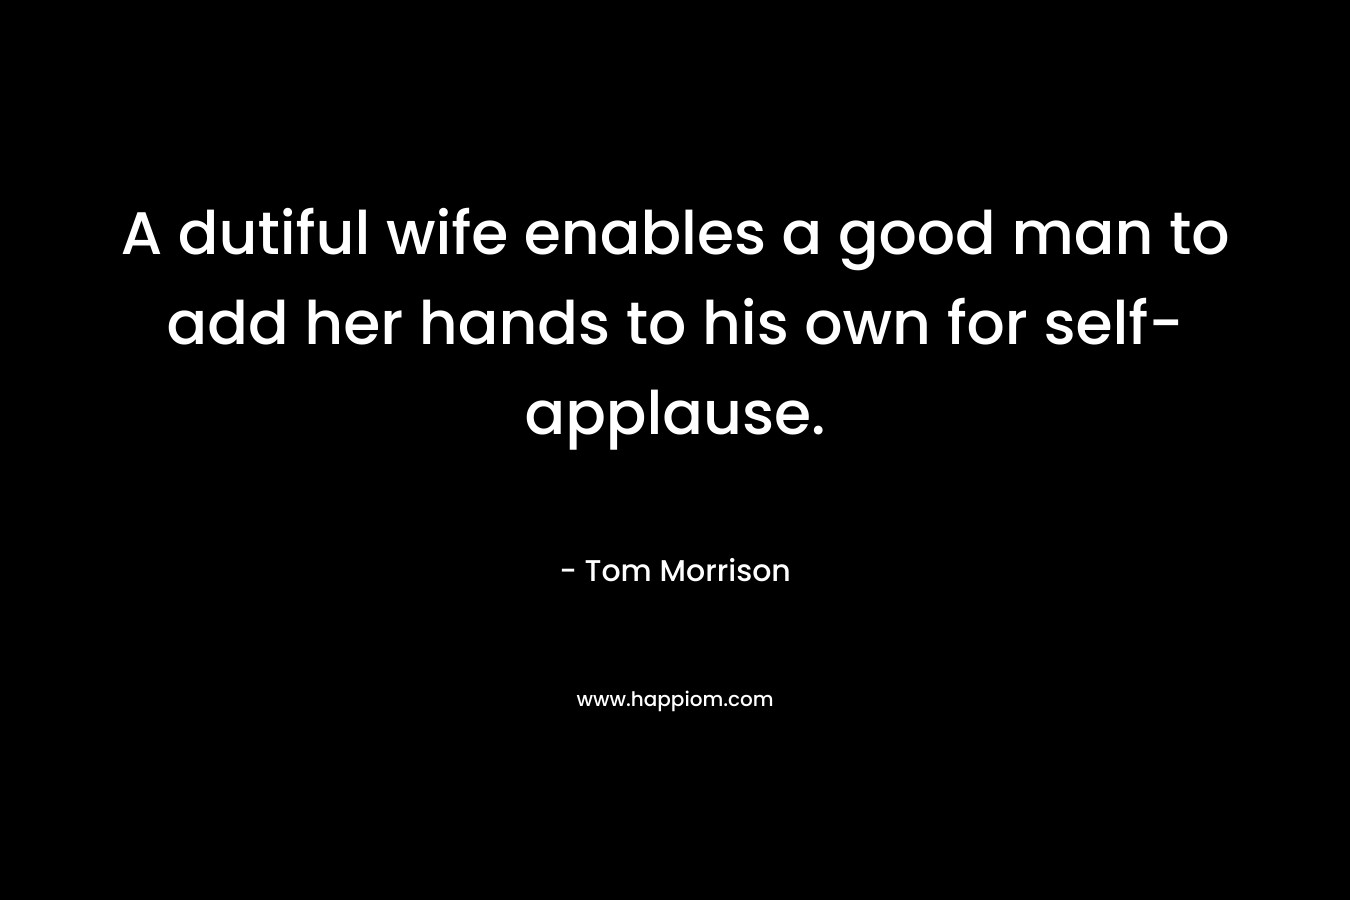 A dutiful wife enables a good man to add her hands to his own for self-applause. – Tom Morrison